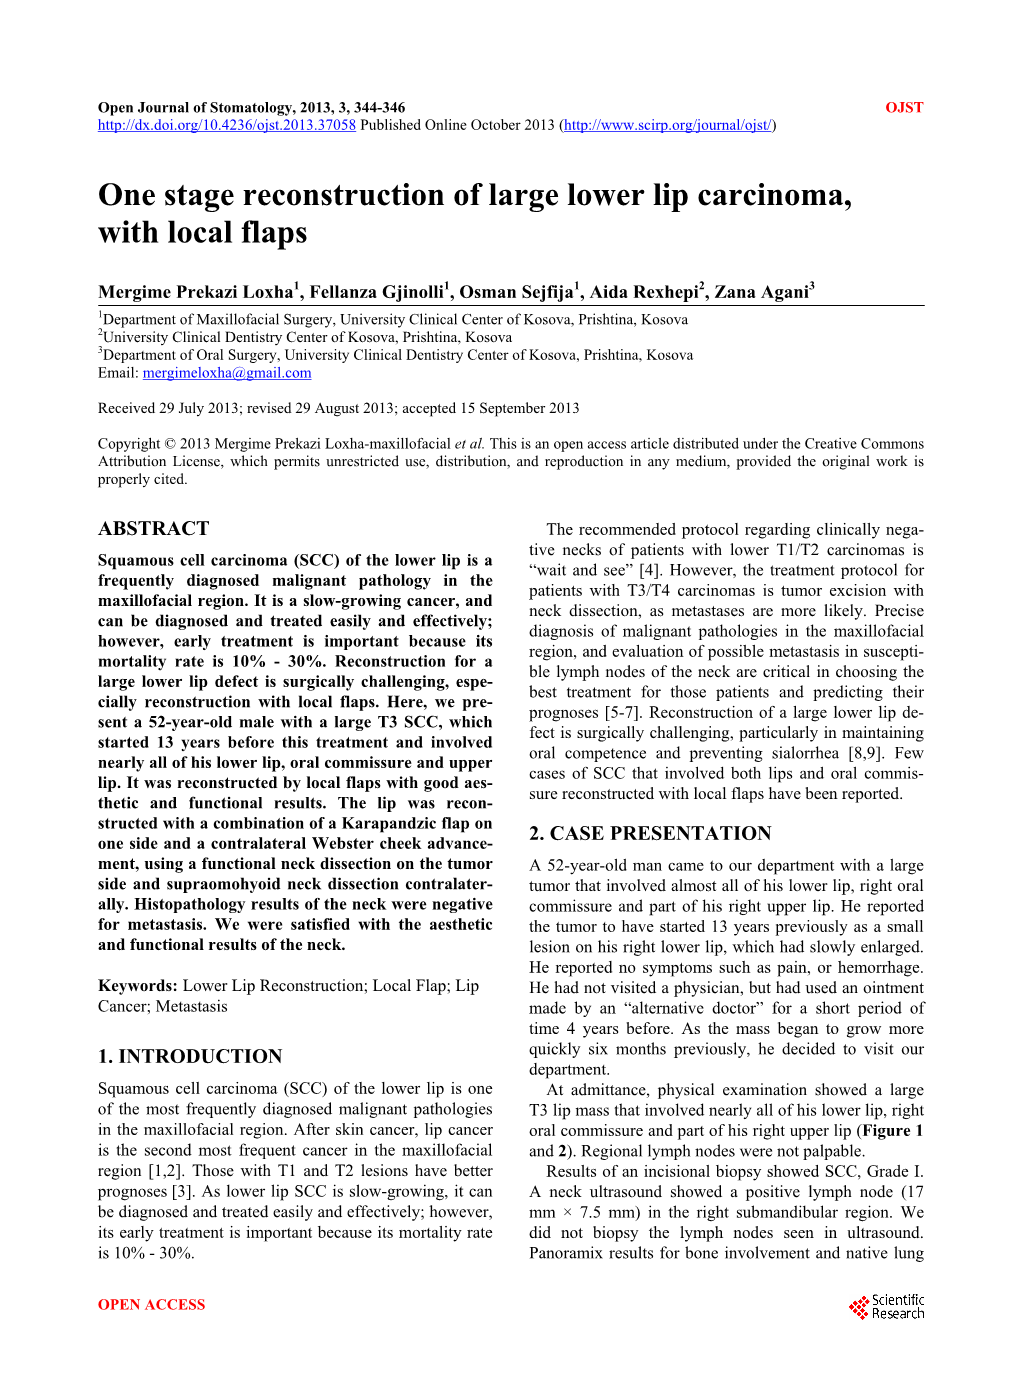 One Stage Reconstruction of Large Lower Lip Carcinoma, with Local Flaps